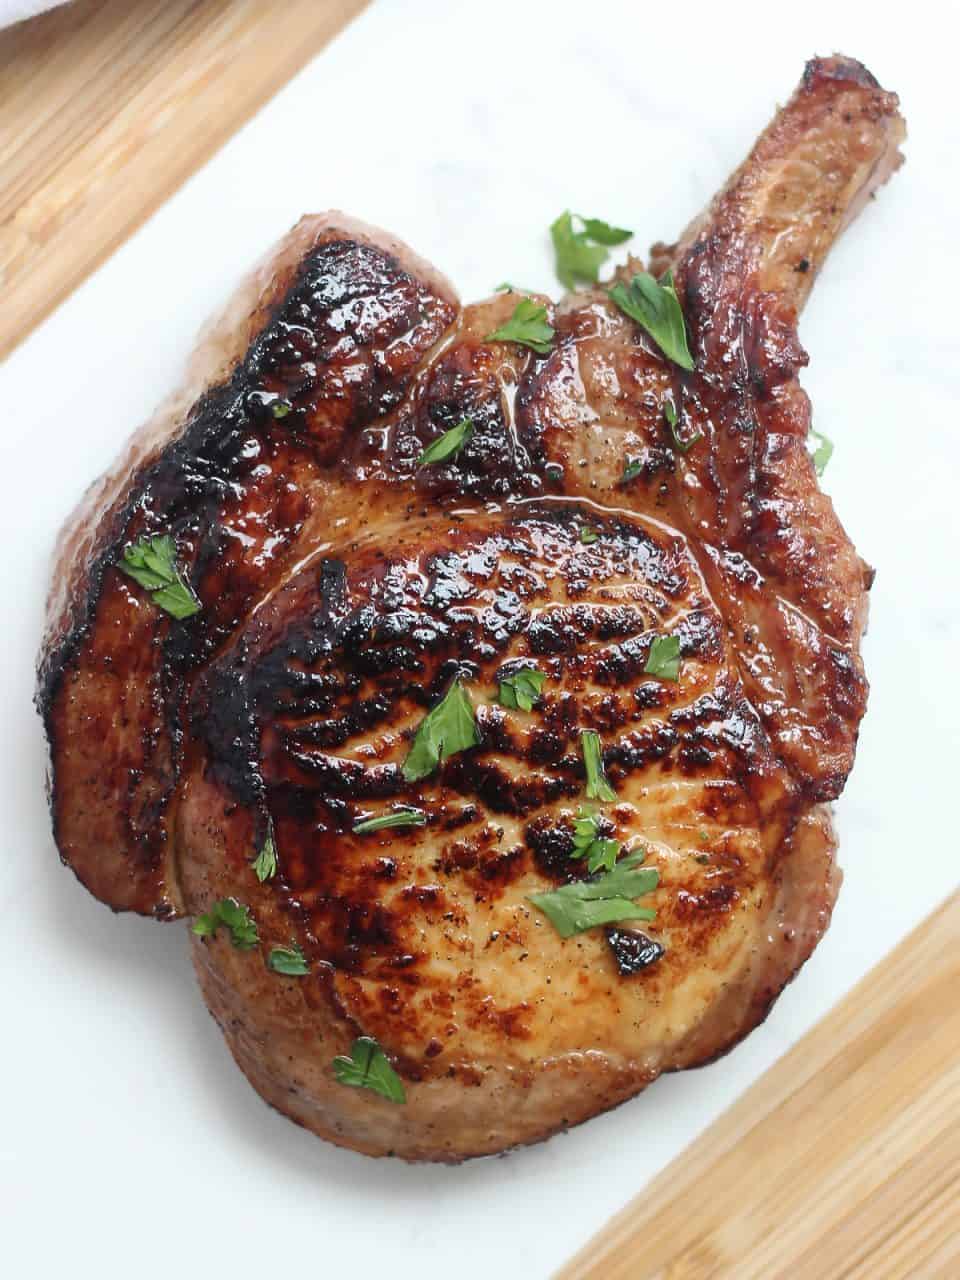 Overhead shot of a cooked pork chop with fresh herbs.